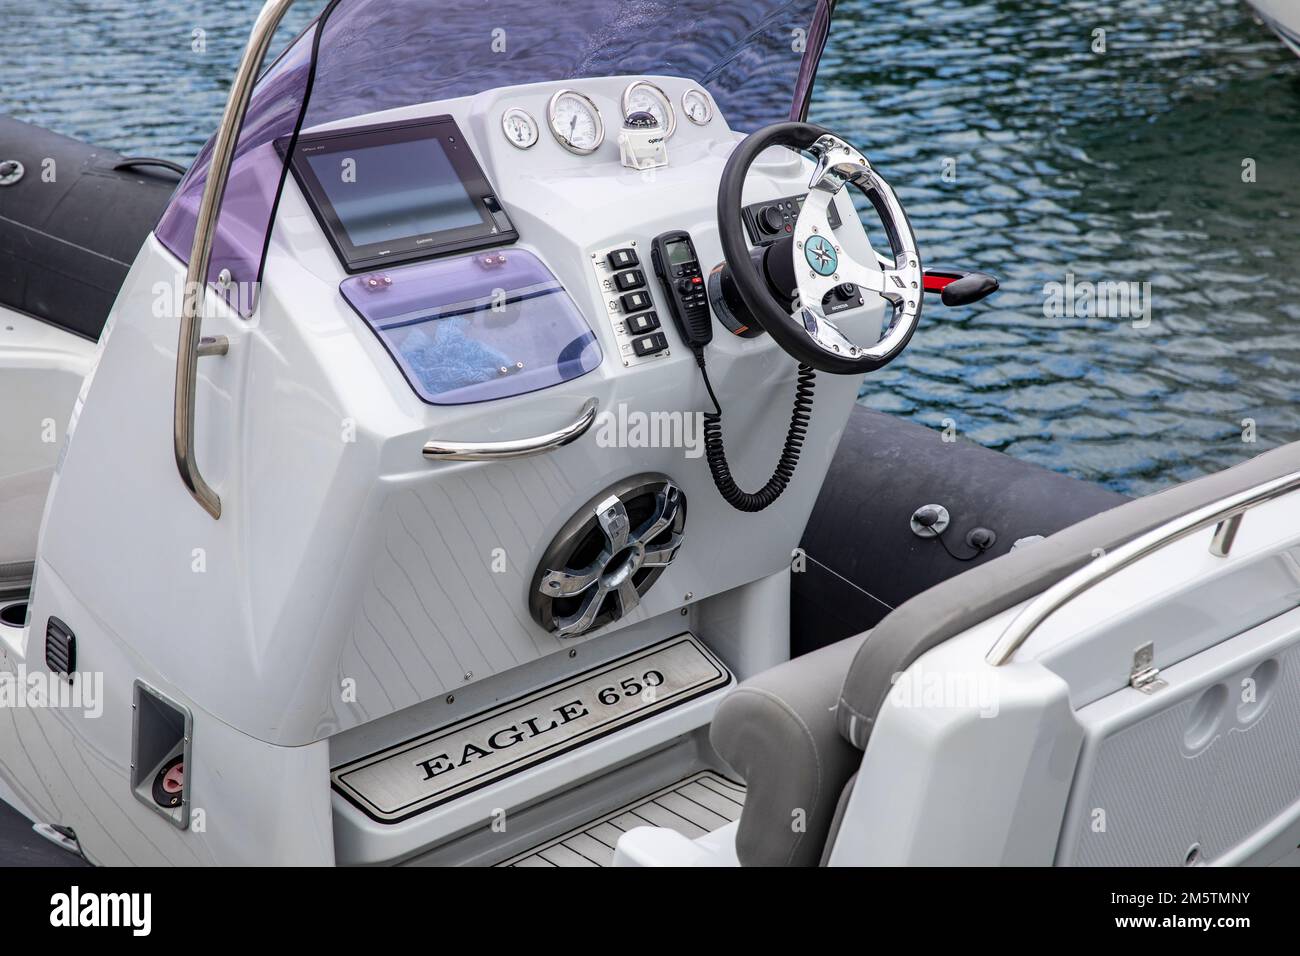 BRIG 650 eagle vessel RIB and close up of boat wheel and boat electronic controls,NSW,Australia Stock Photo